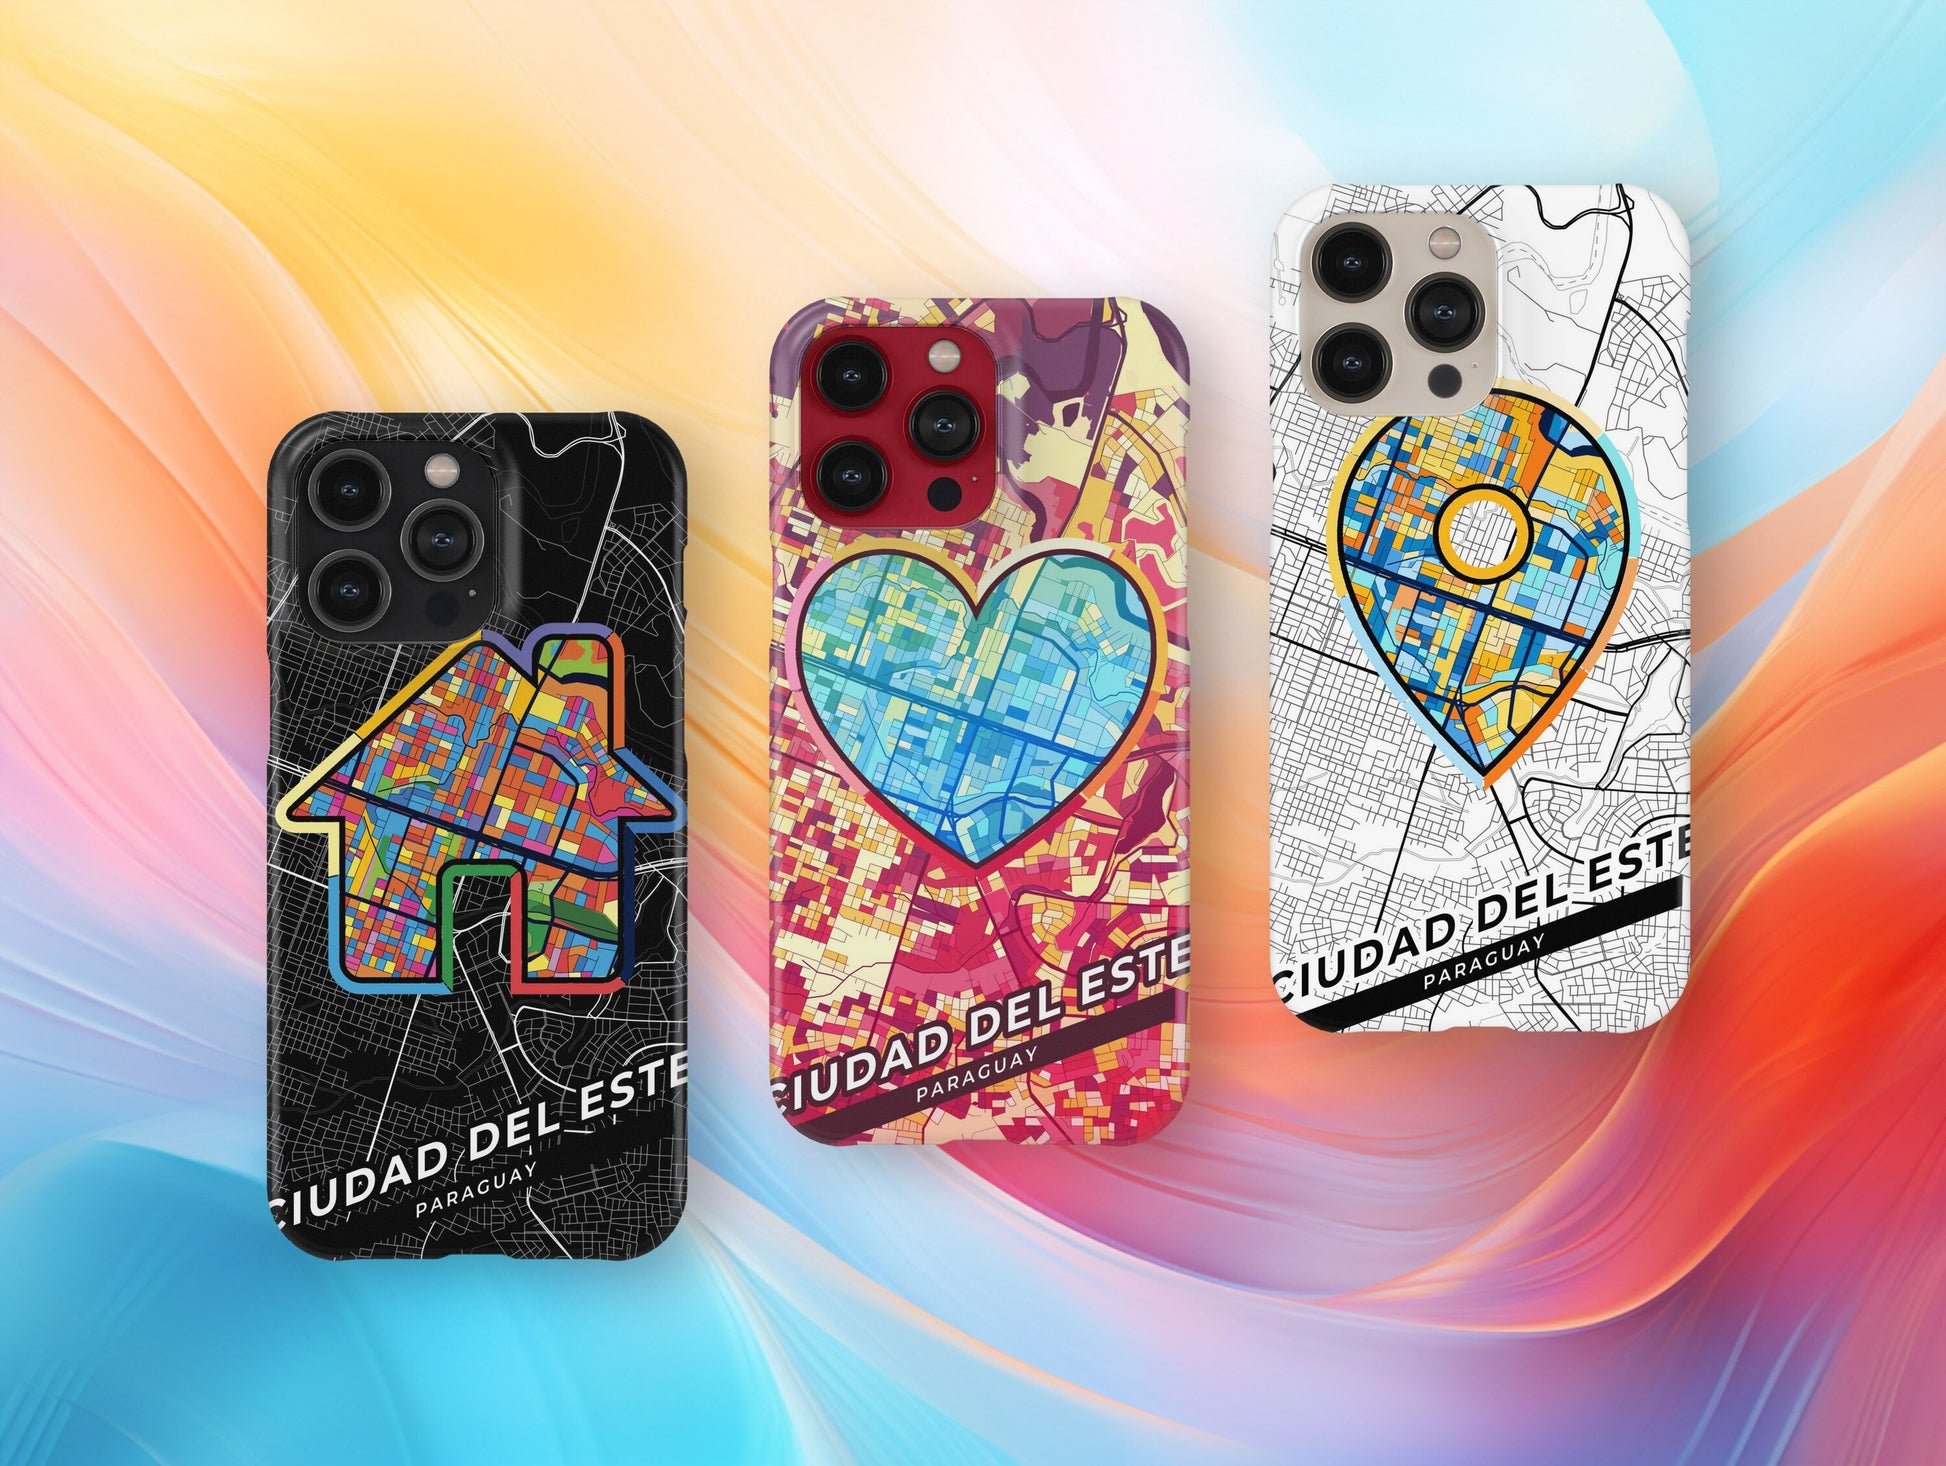 Ciudad Del Este Paraguay slim phone case with colorful icon. Birthday, wedding or housewarming gift. Couple match cases.